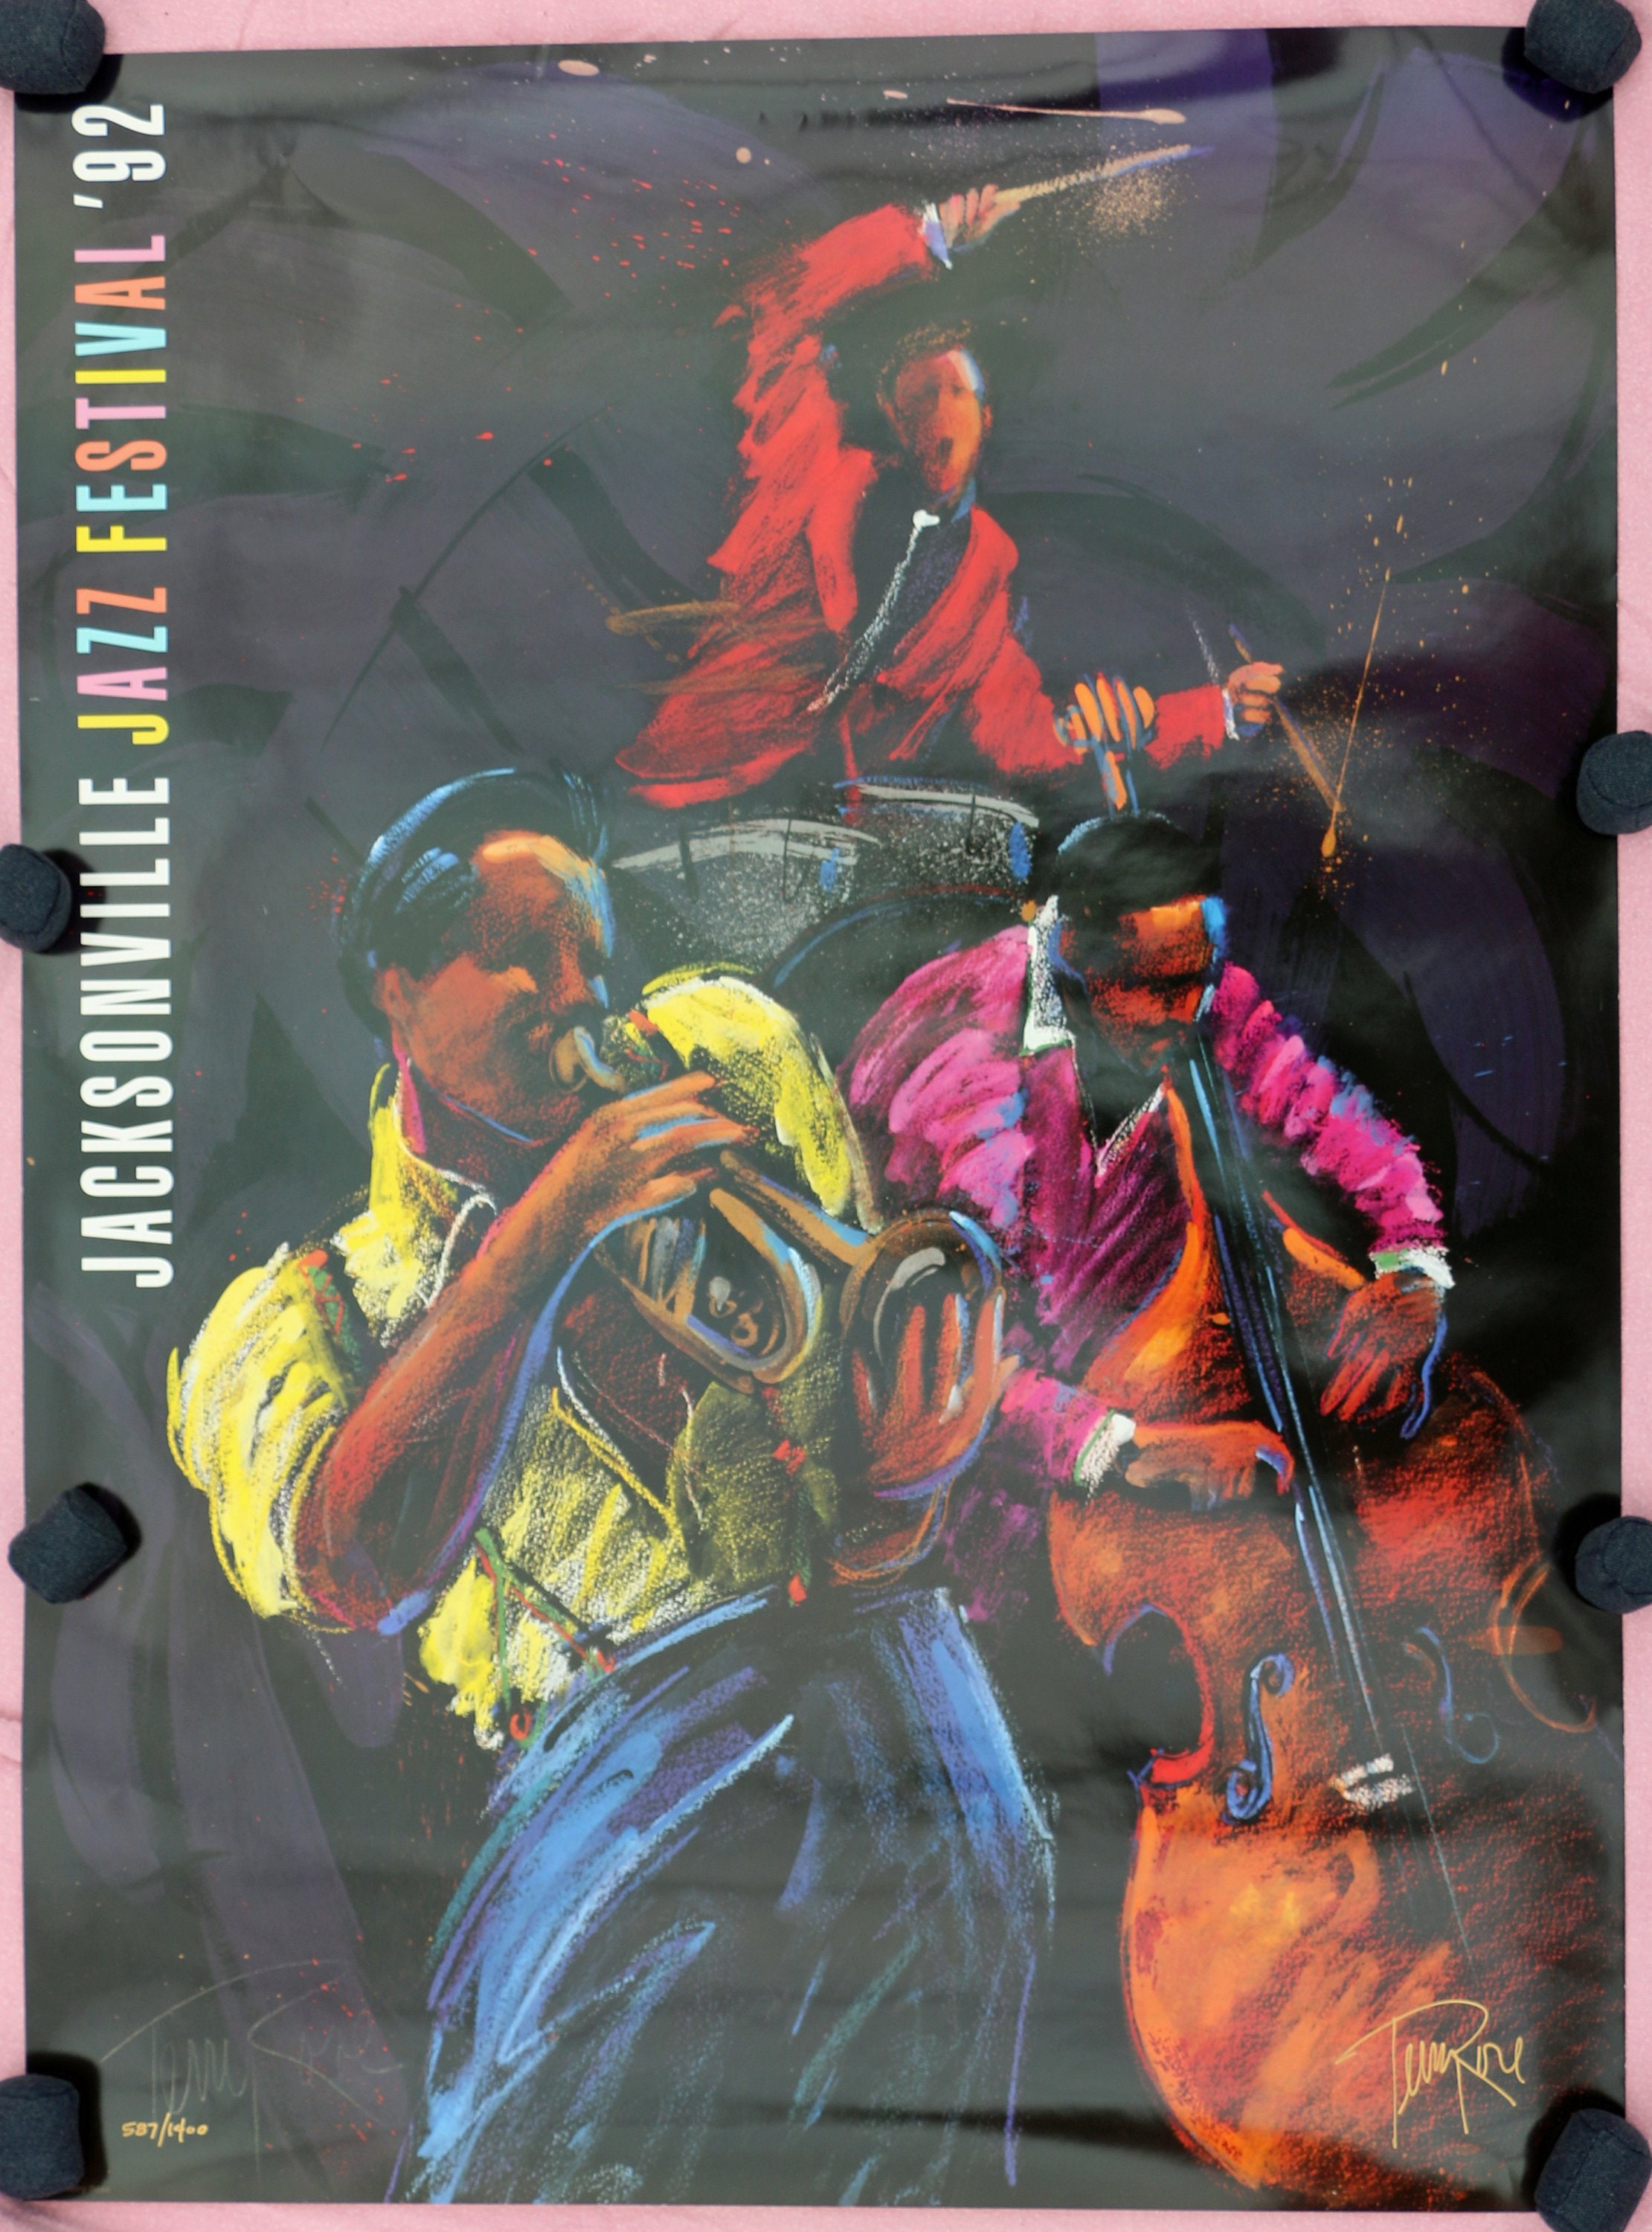 1992 Jacksonville Jazz Festival Poster 587 Signed by Terry - Etsy